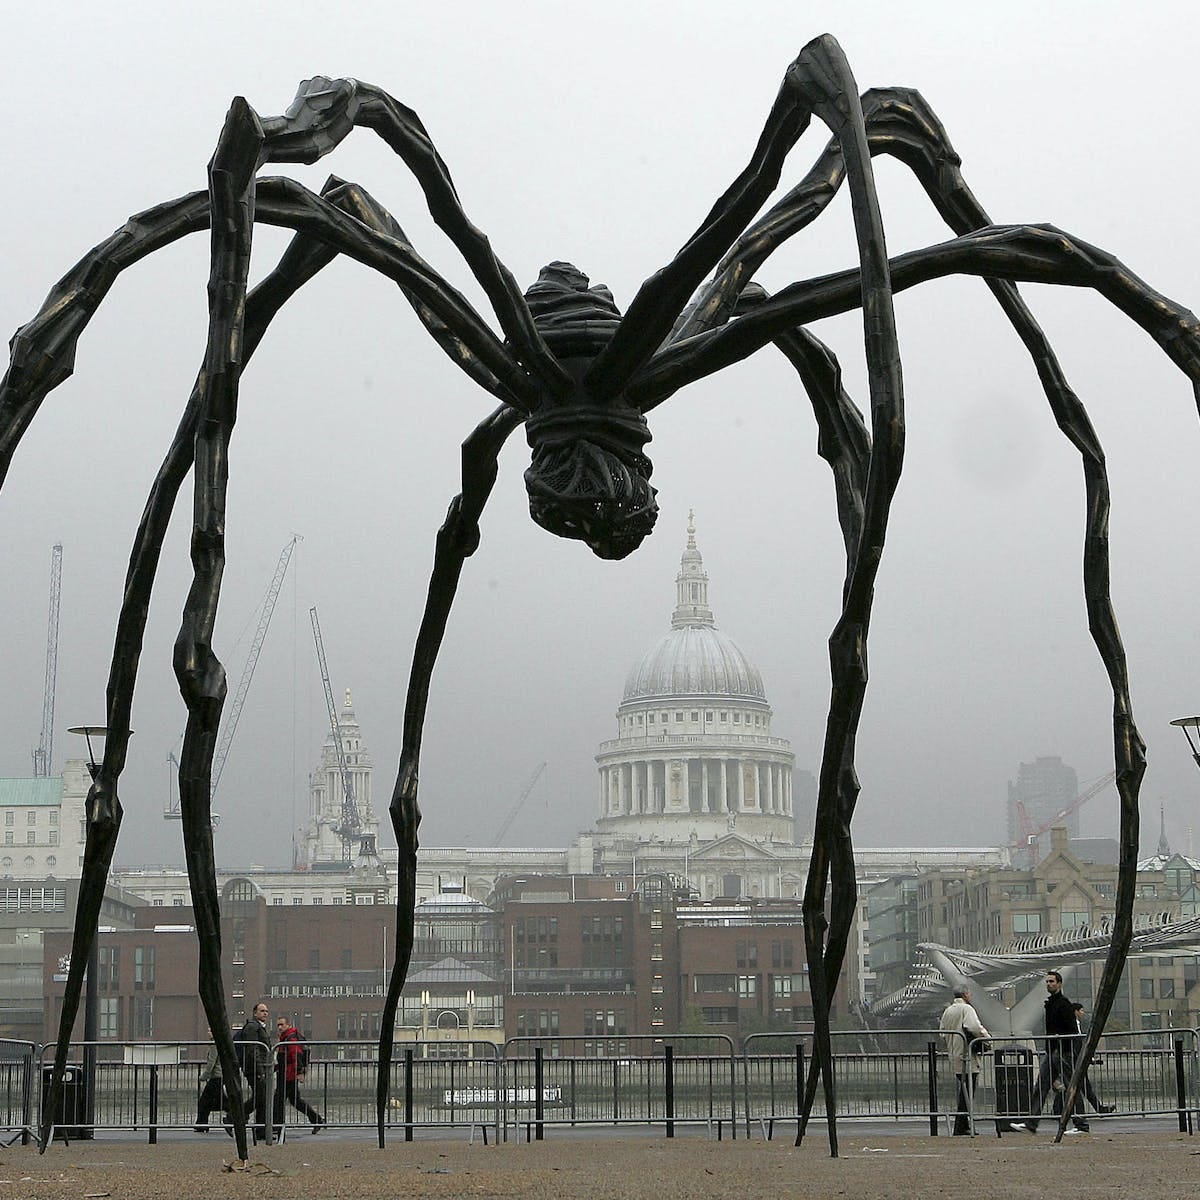 If I could go anywhere: I'd revisit Maman, Louise Bourgeois' 9-metre spider  at London's Tate Modern